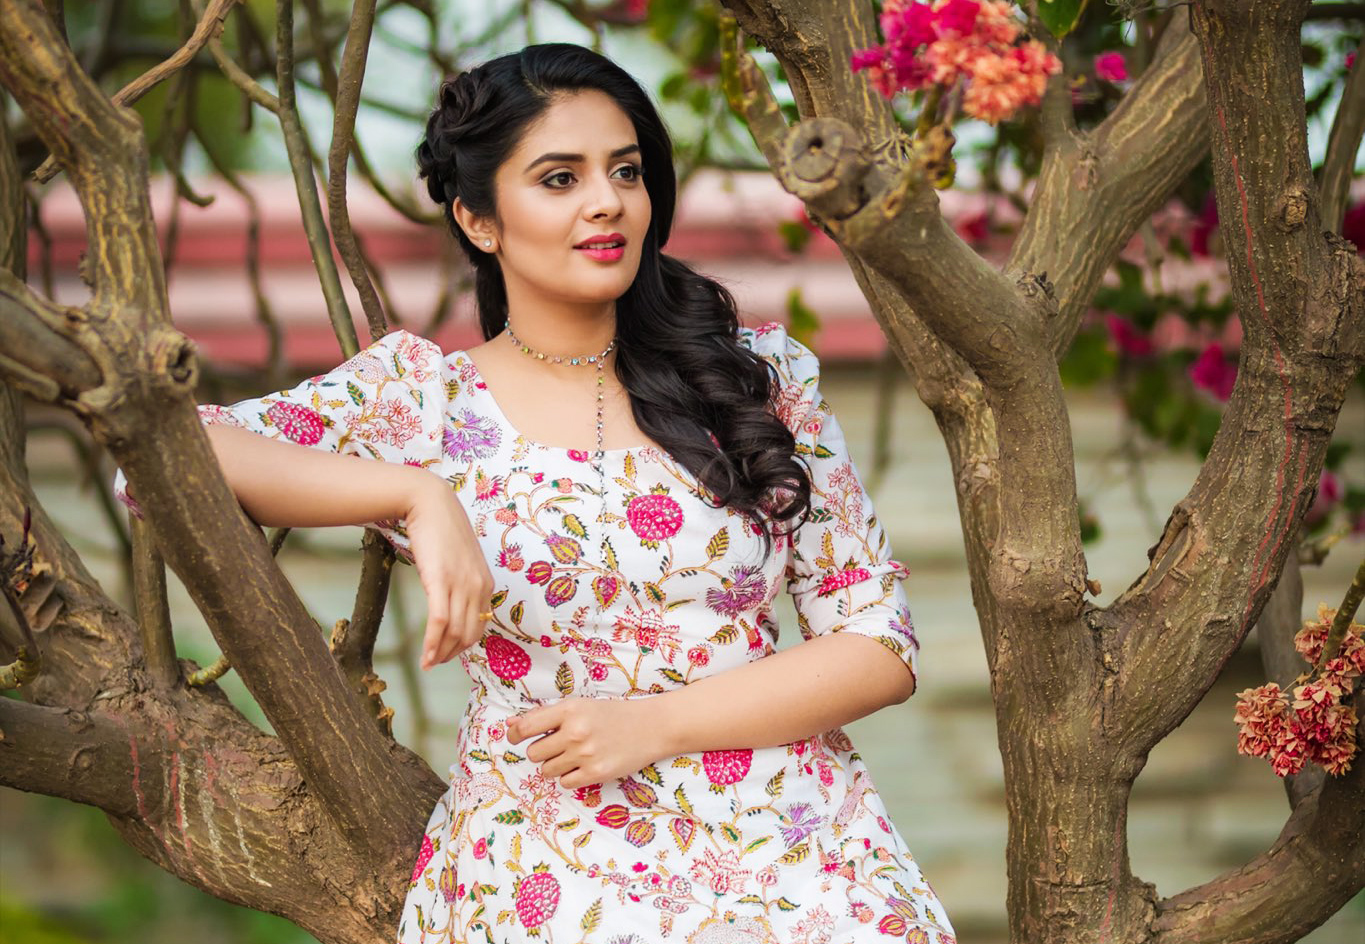 SreeMukhi in floral outfit by Kirthana Sunil